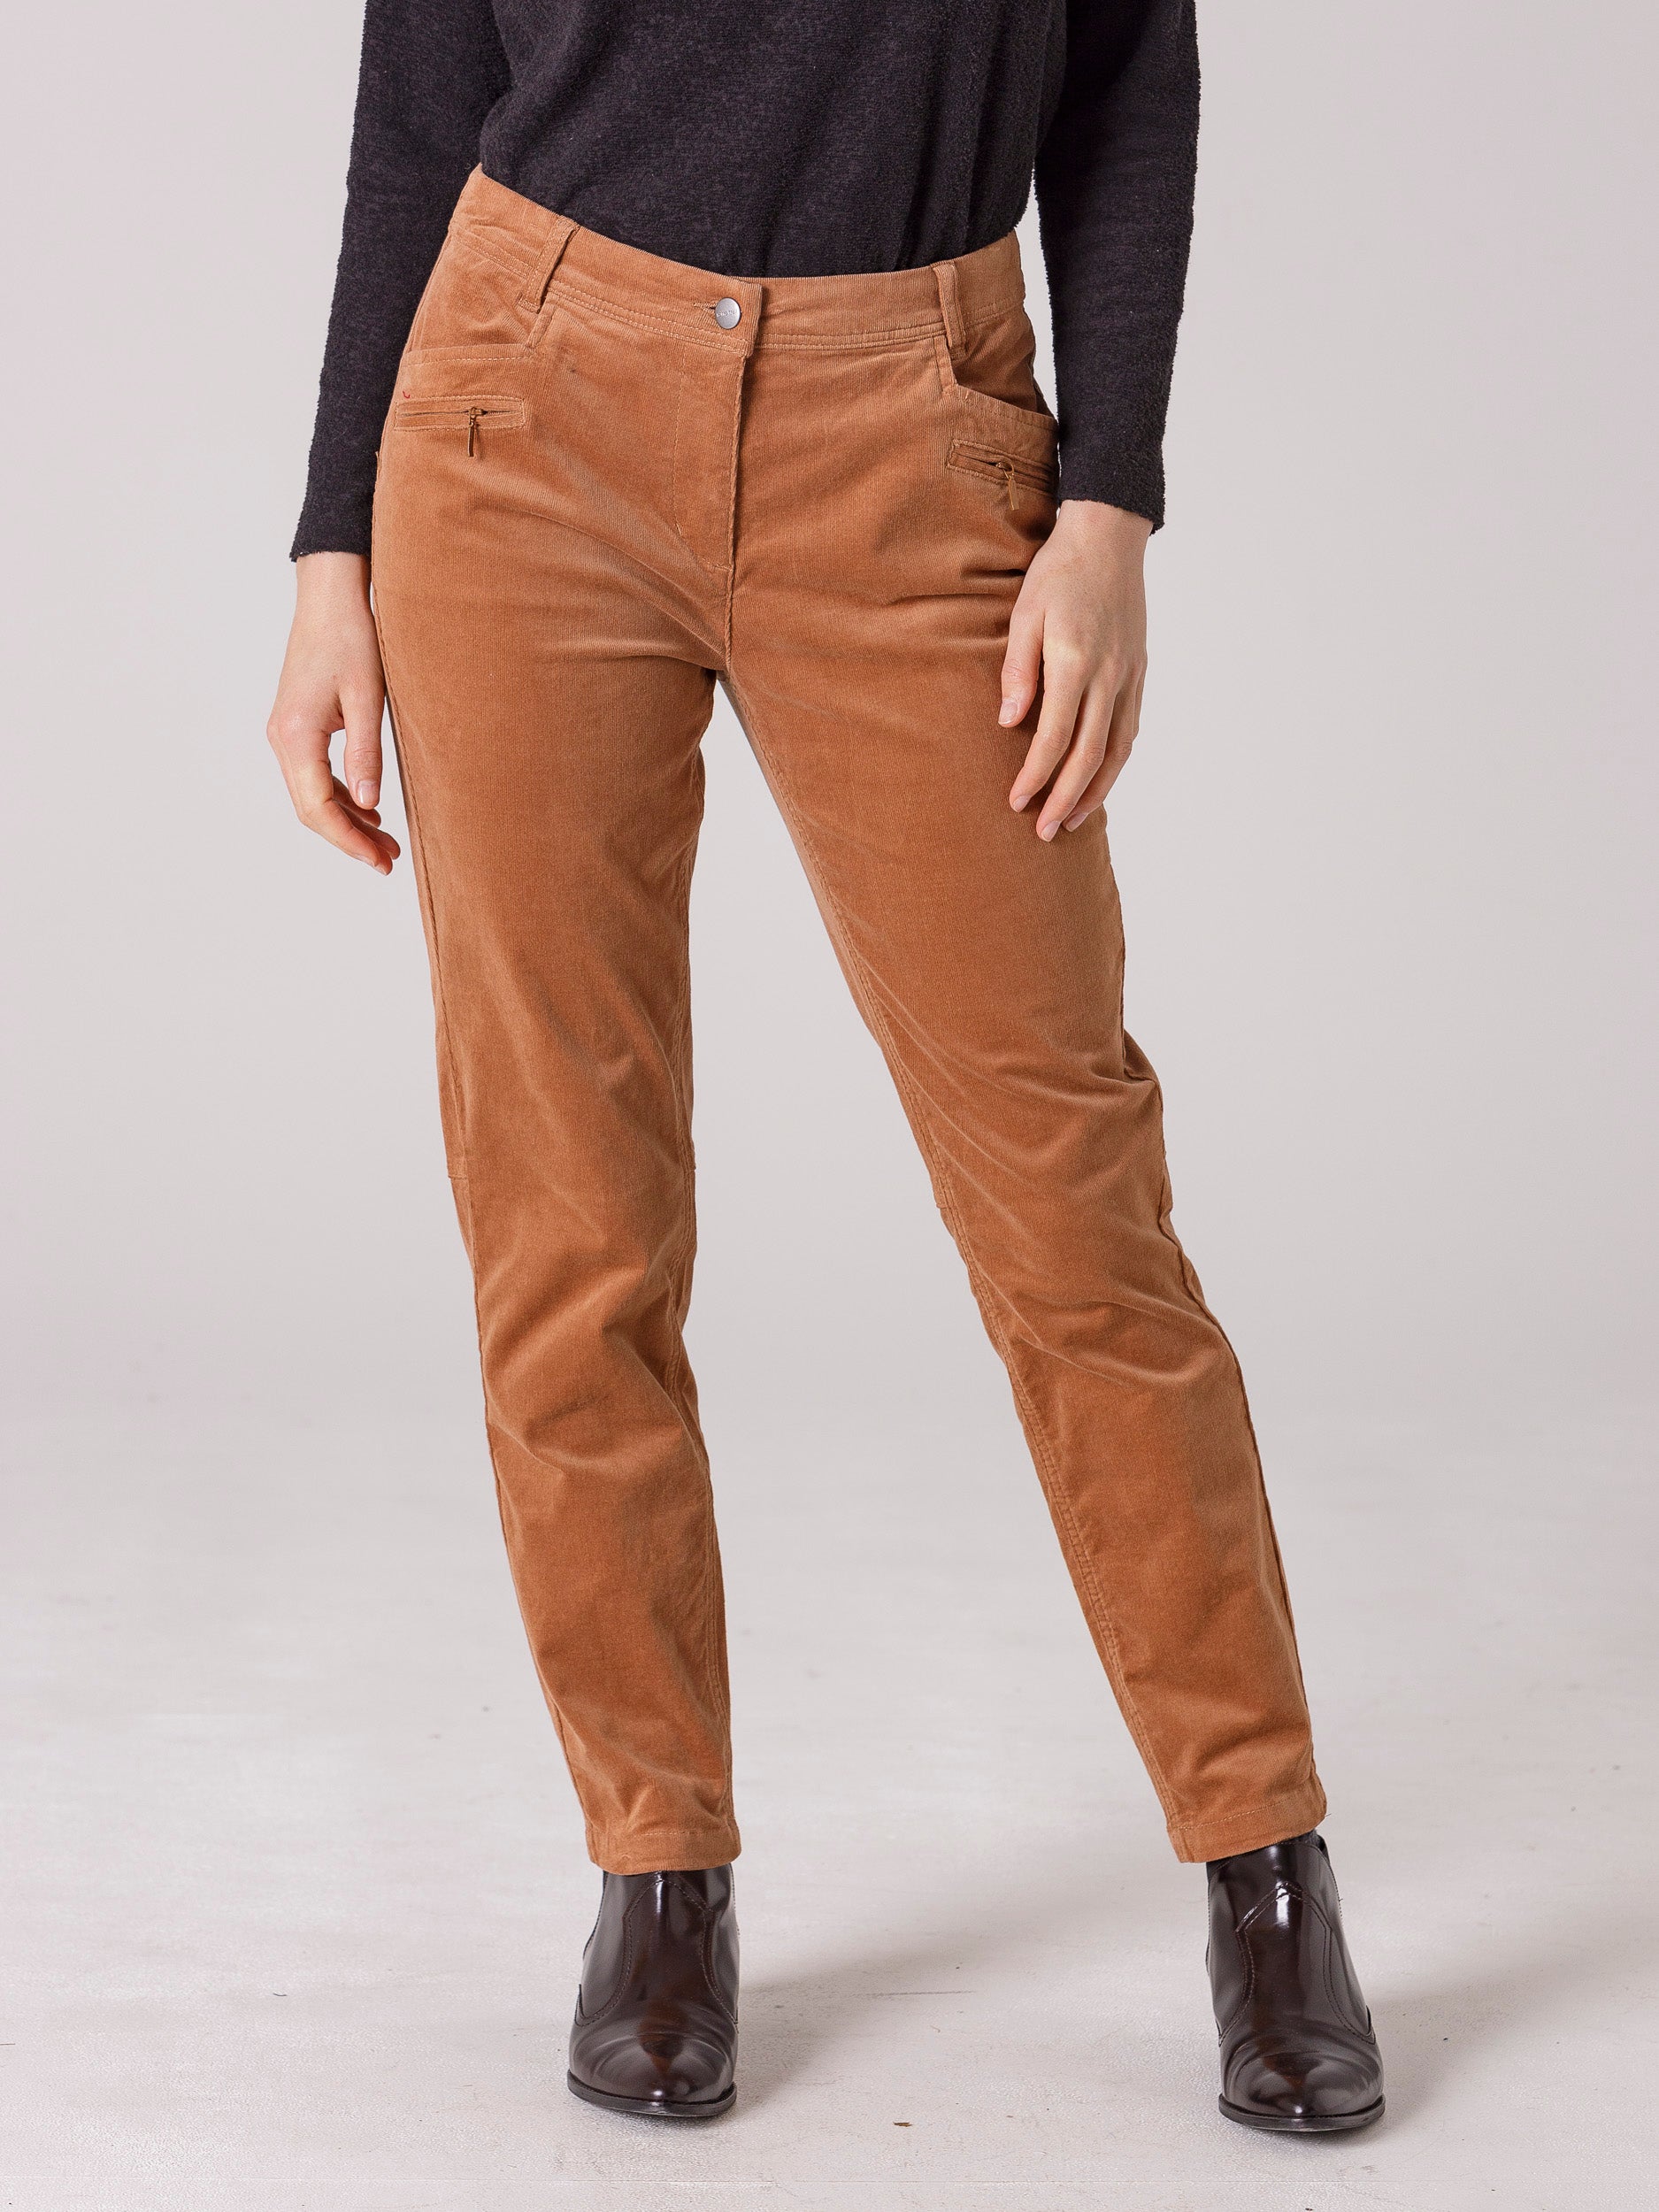 Dickies Brown Corduroy Trousers  Clothes Fashion Brown trousers outfit